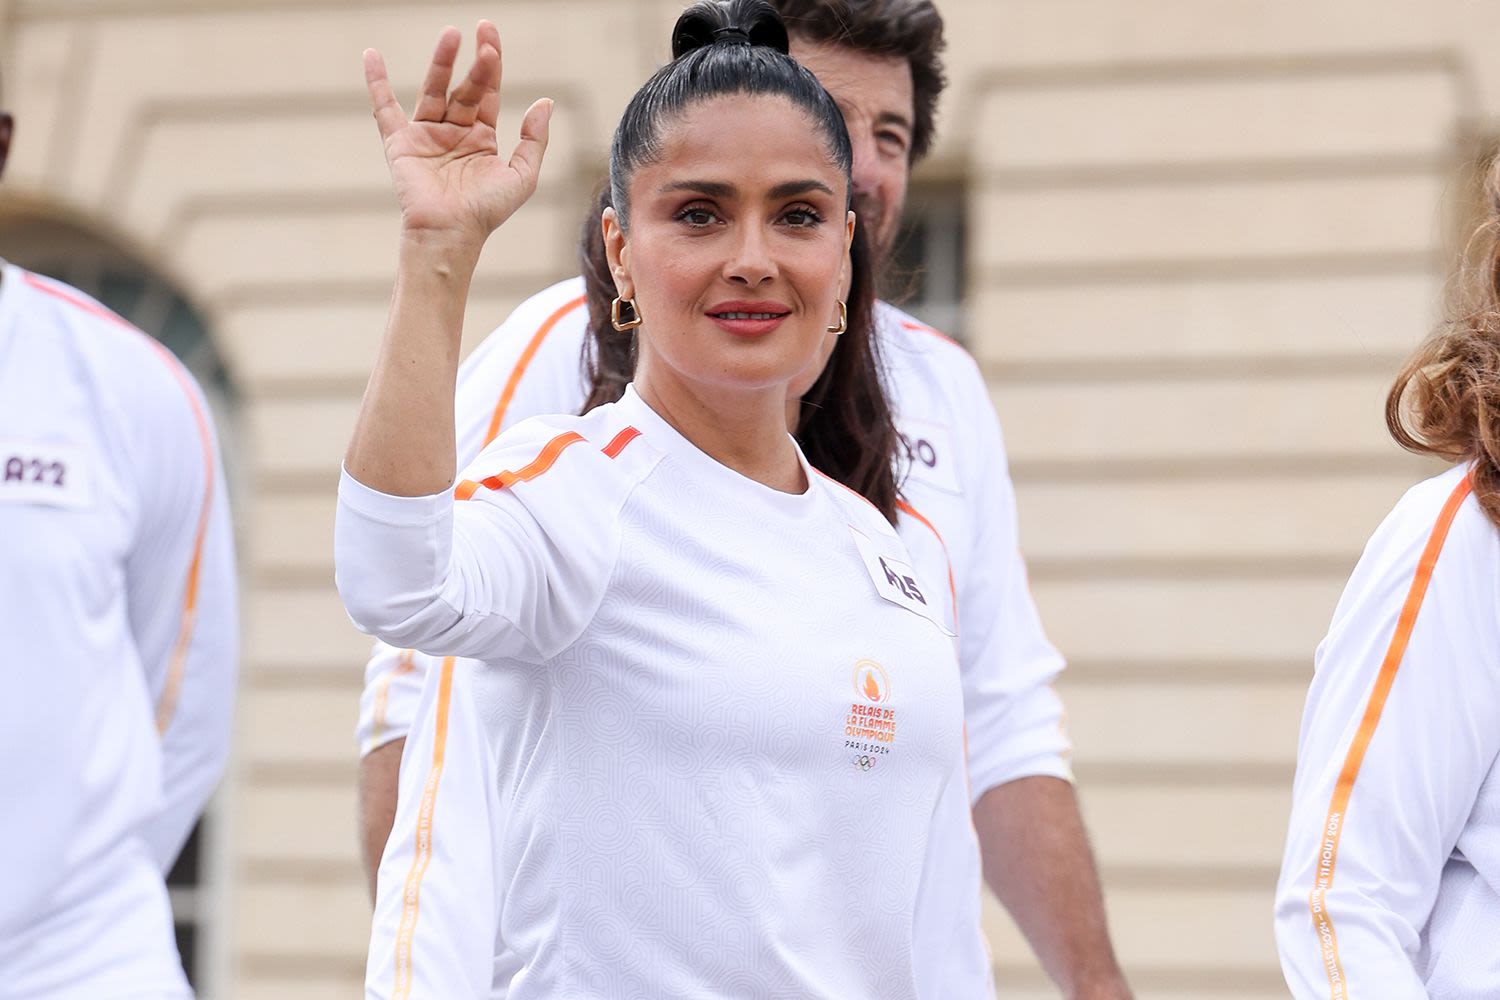 Salma Hayek Carries the Olympic Flame, Plus Rihanna, Chris Hemsworth, Camila Cabello and More